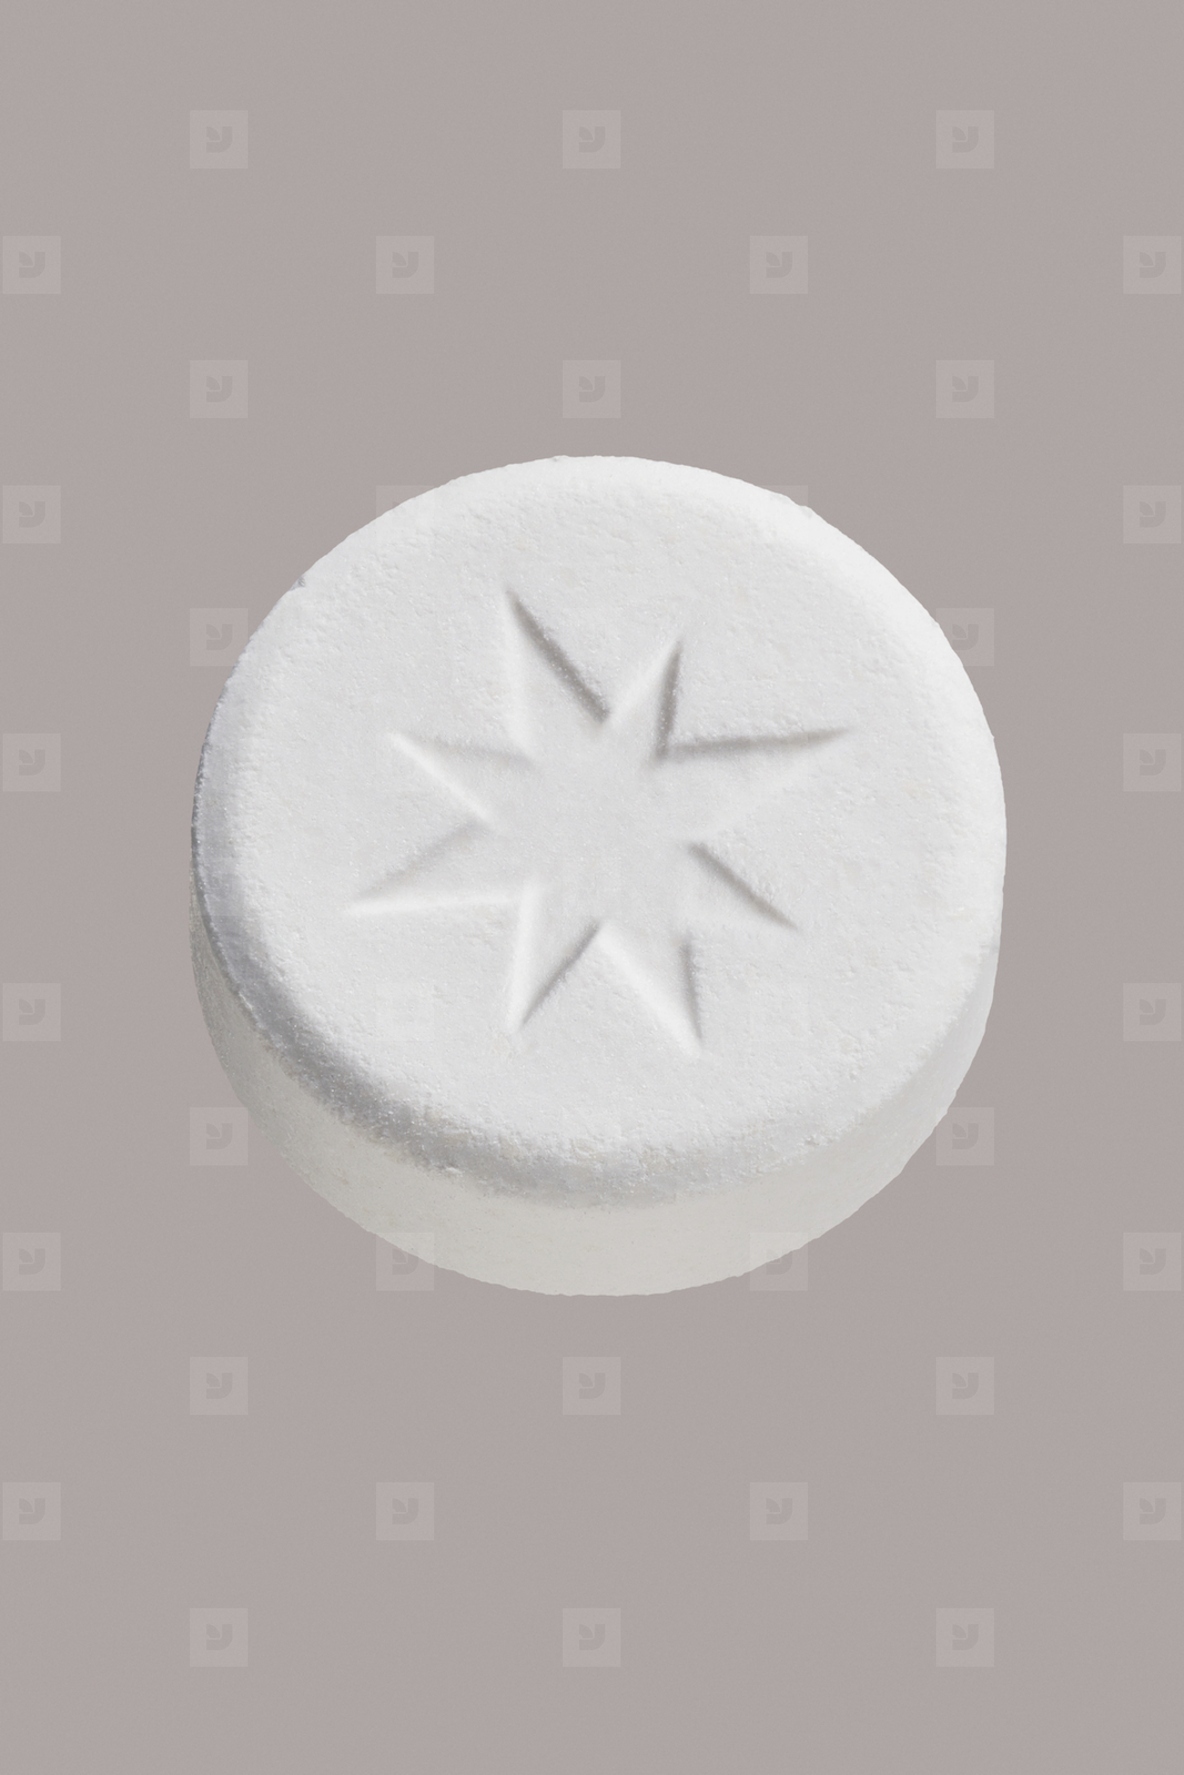 Close up Ecstasy tablet with star